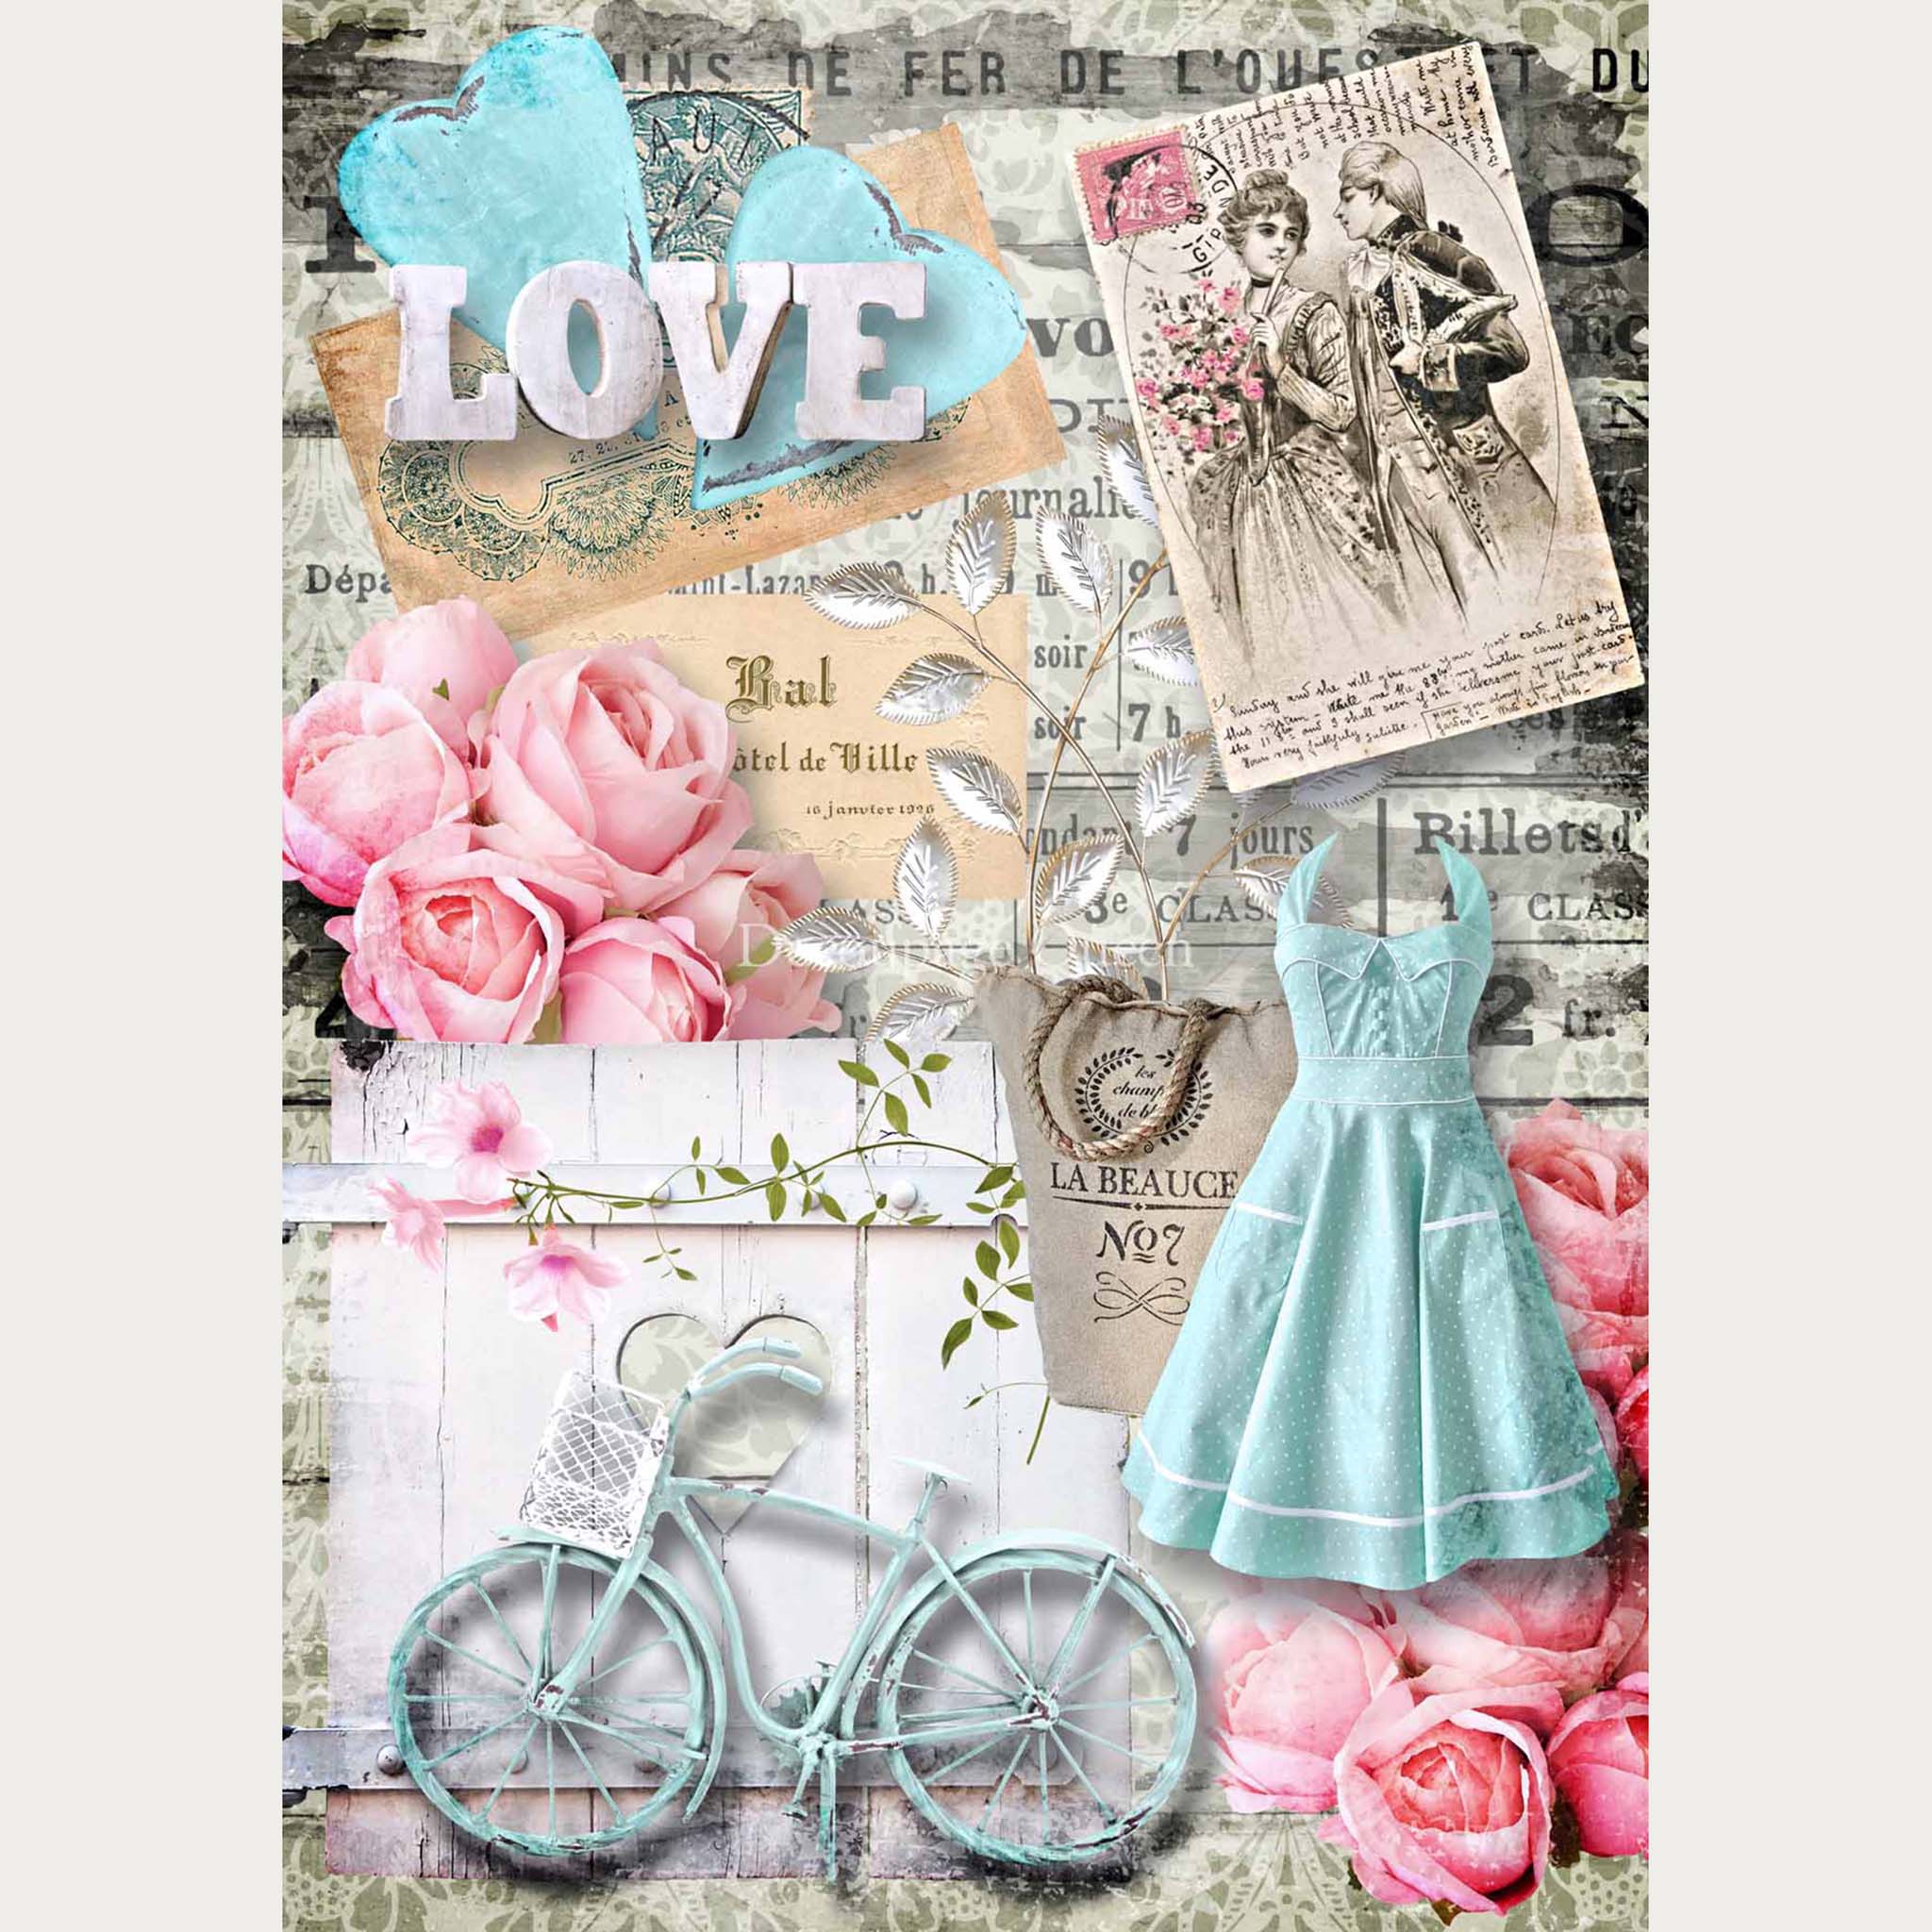 A3 rice paper that features a collage of vintage postcards, pink roses, a white picket fence and a vintage light blue bicycle and dress. White borders are on the sides.